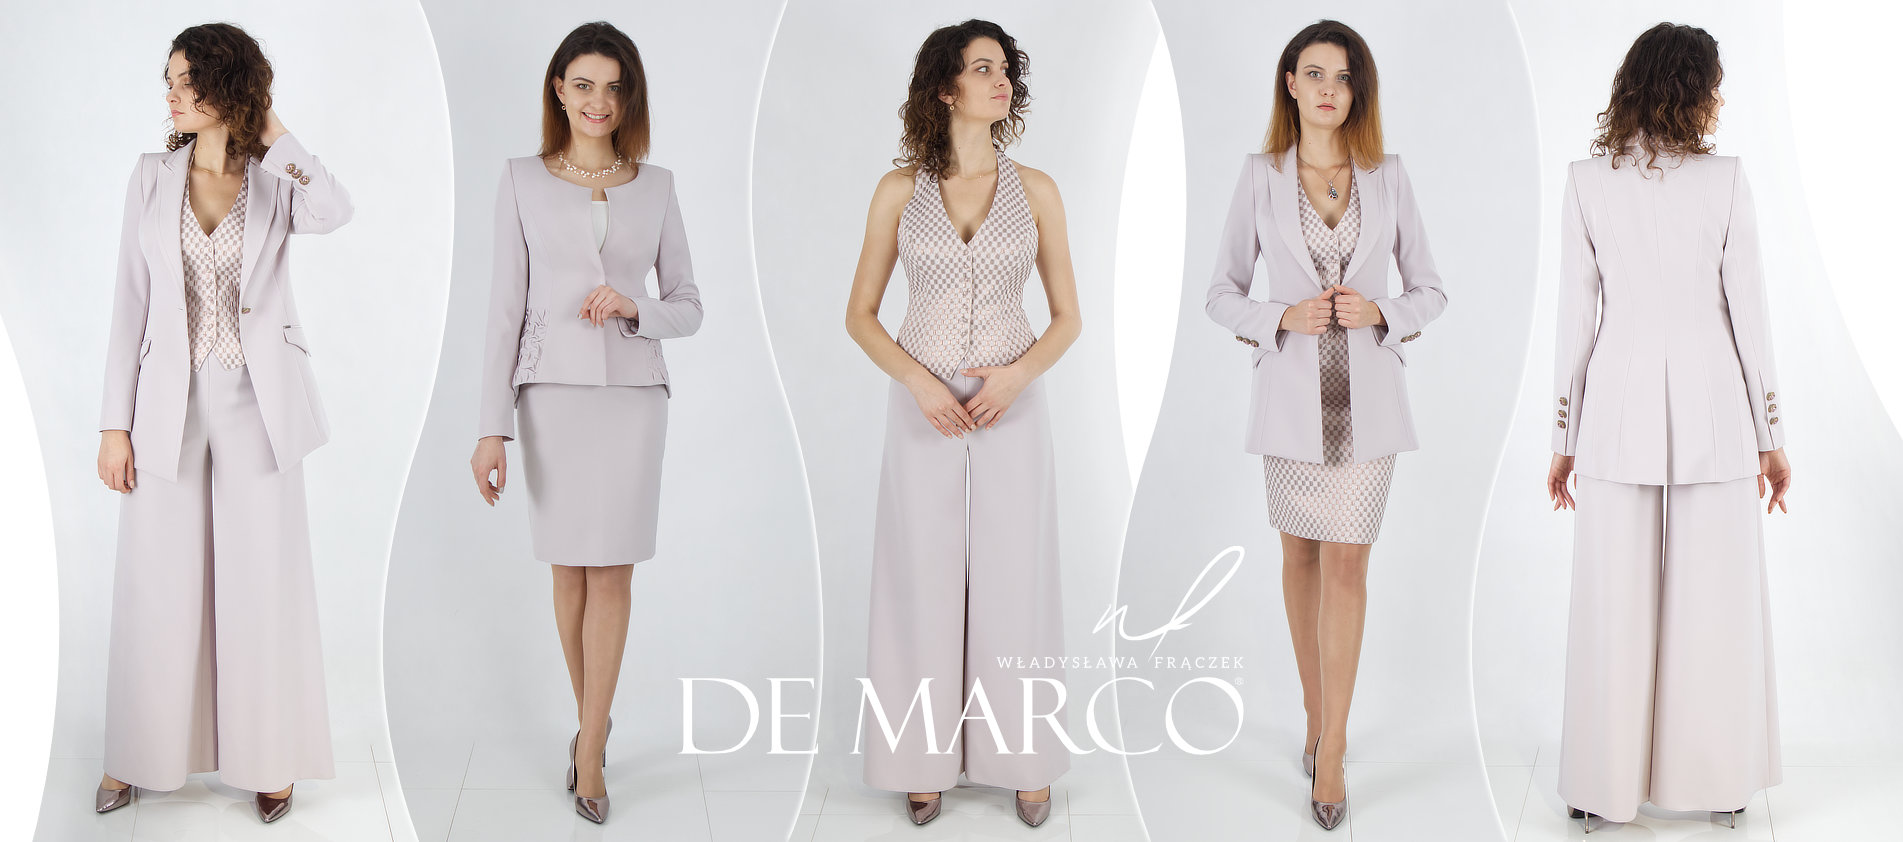 De Marco branded women’s clothing: Your Clothes, Your Style. Online shop